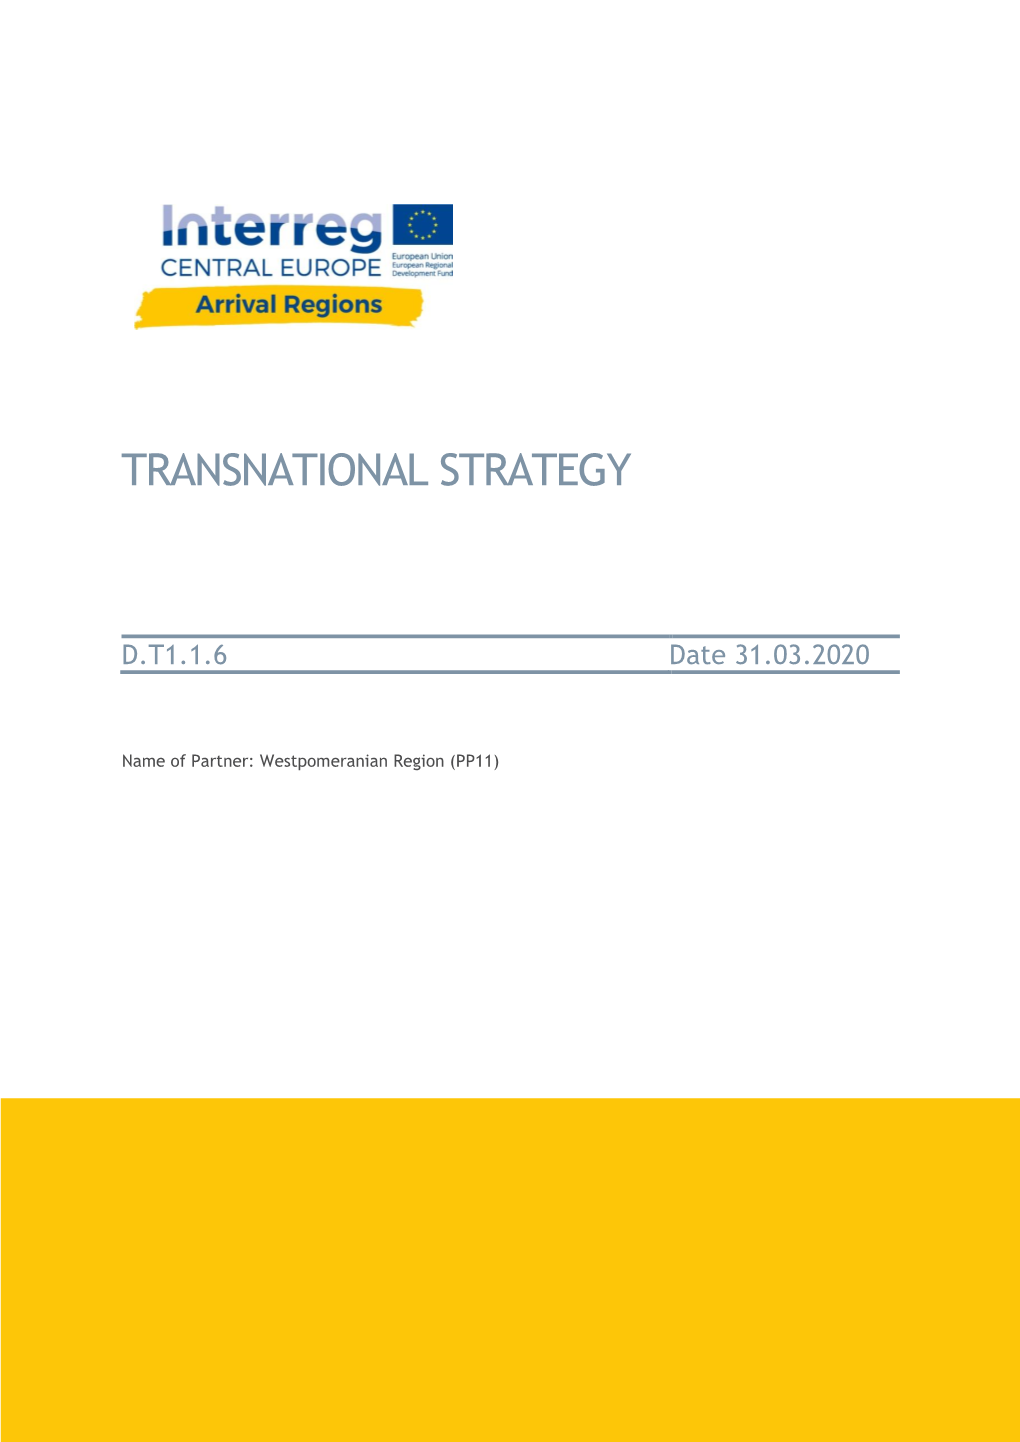 D.T1.1.6 Transnational Strategy